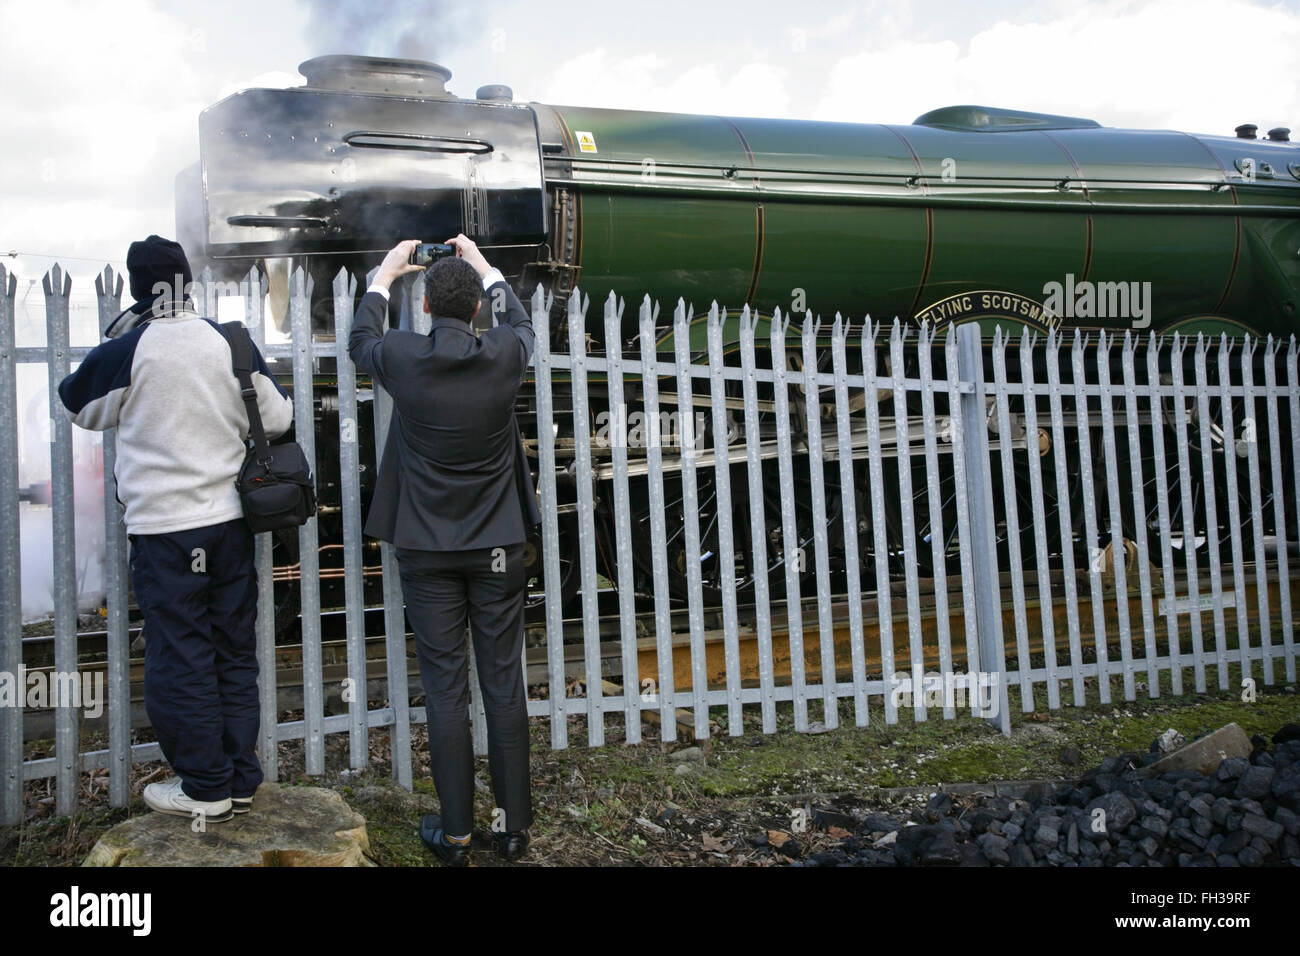 York, UK. 23rd February, 2016. Spectators watch as the newly restored LNER A3 class locomotive “Flying Scotsman” prepares to travel from York to Scarborough on a final test run before its inaugural comeback journey from London King's Cross to York on Thursday 25 February. The locomotive, owned by the National Railway Museum (NRM), has been fully restored at a cost of £4.2 million and in addition to featuring in a new exhibition at the NRM's York location will be hauling special trains throughout the UK in the coming months. Credit:  david soulsby/Alamy Live News Stock Photo